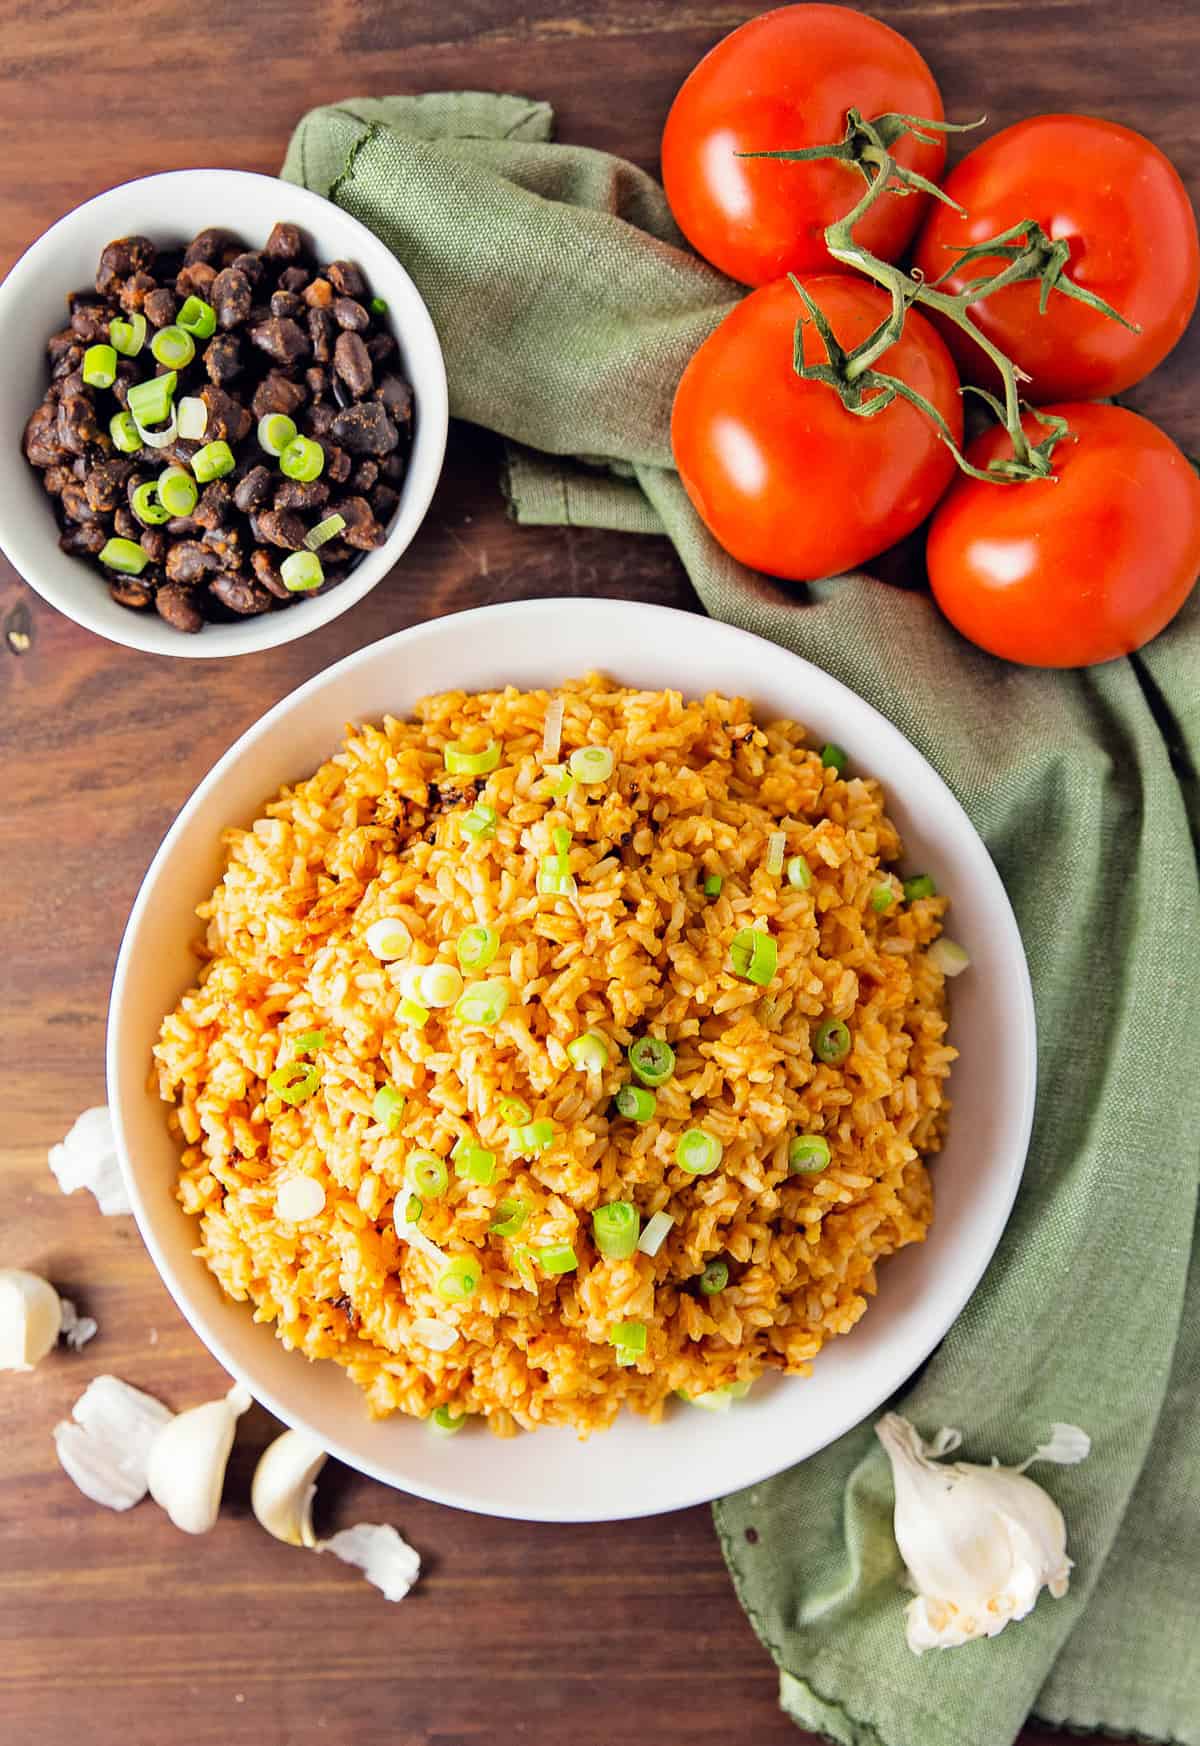 Mexican rice, rice, Mexican, rice dish, recipe, Mexican rice recipe, rice recipe, Spanish rice, Spanish, vegan, vegan recipe, whole food plant based recipe, whole food plant based, vegetarian, vegetarian recipe, gluten free, gluten free recipe, vegan dinner, vegan meals, vegetarian dinner, vegetarian meal, whole food plant based dinner, whole food plant based meal, gluten free dinner, gluten free meal, healthy, oil free, no oil, quick dinner, fast dinner, entertaining, wfpb, dairy free, no dairy, traditional, Mexican, classic, delicious, the best, winter, fall, spring, summer, fast, easy, quick, simple, 30 minutes, side, side dish,